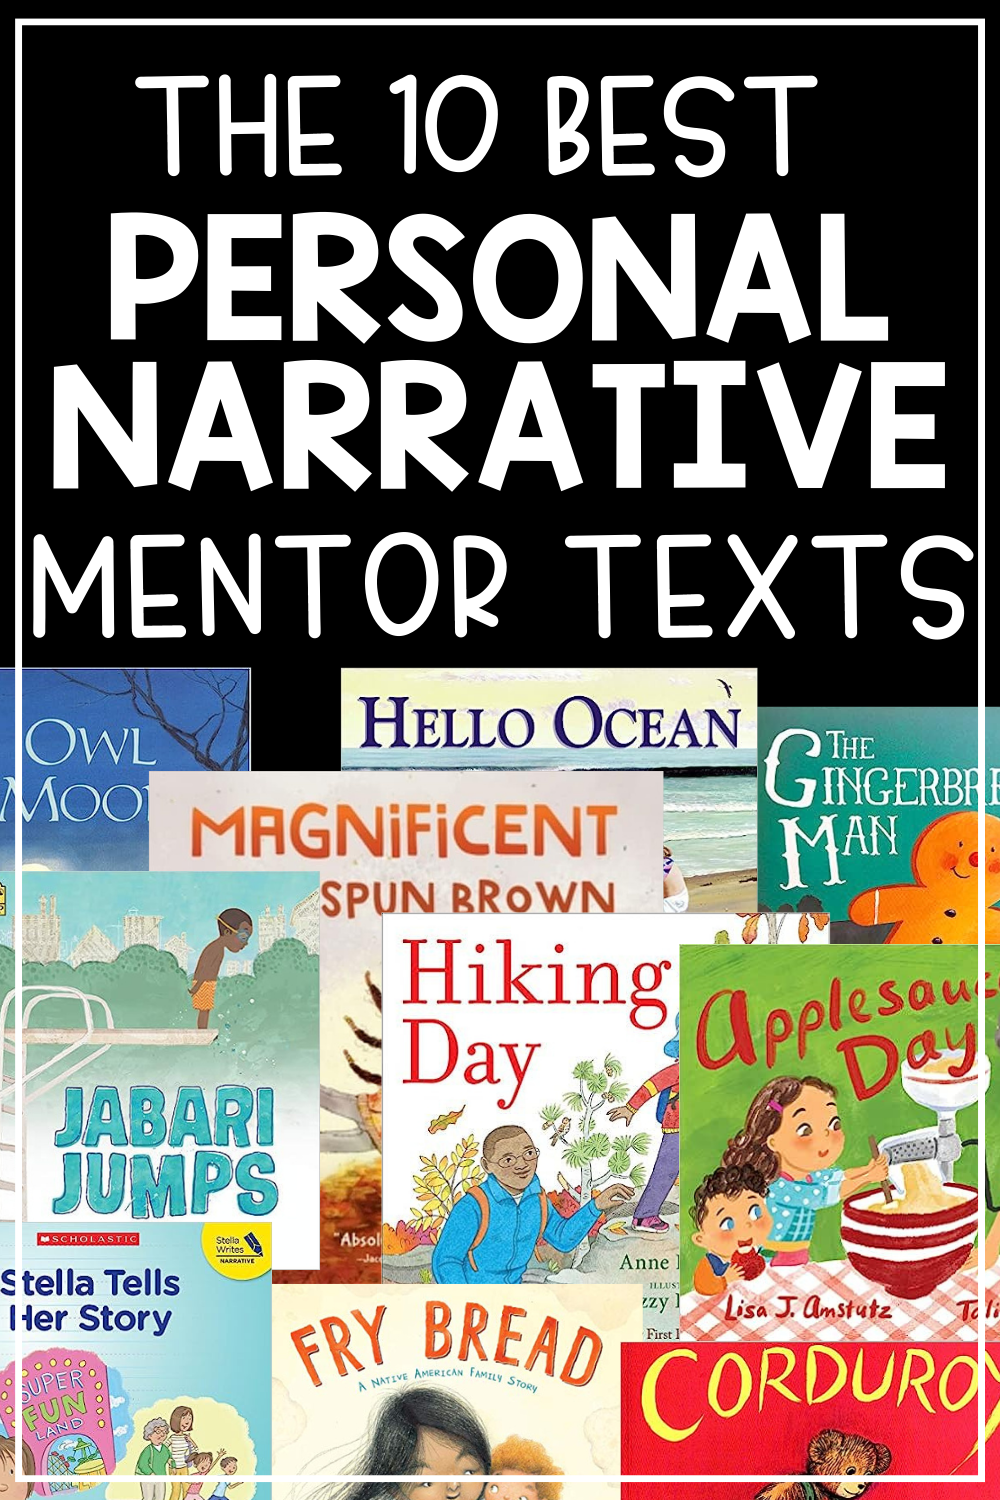 10 Narrative Writing Mentor Texts For Elementary & Middle School Teachers